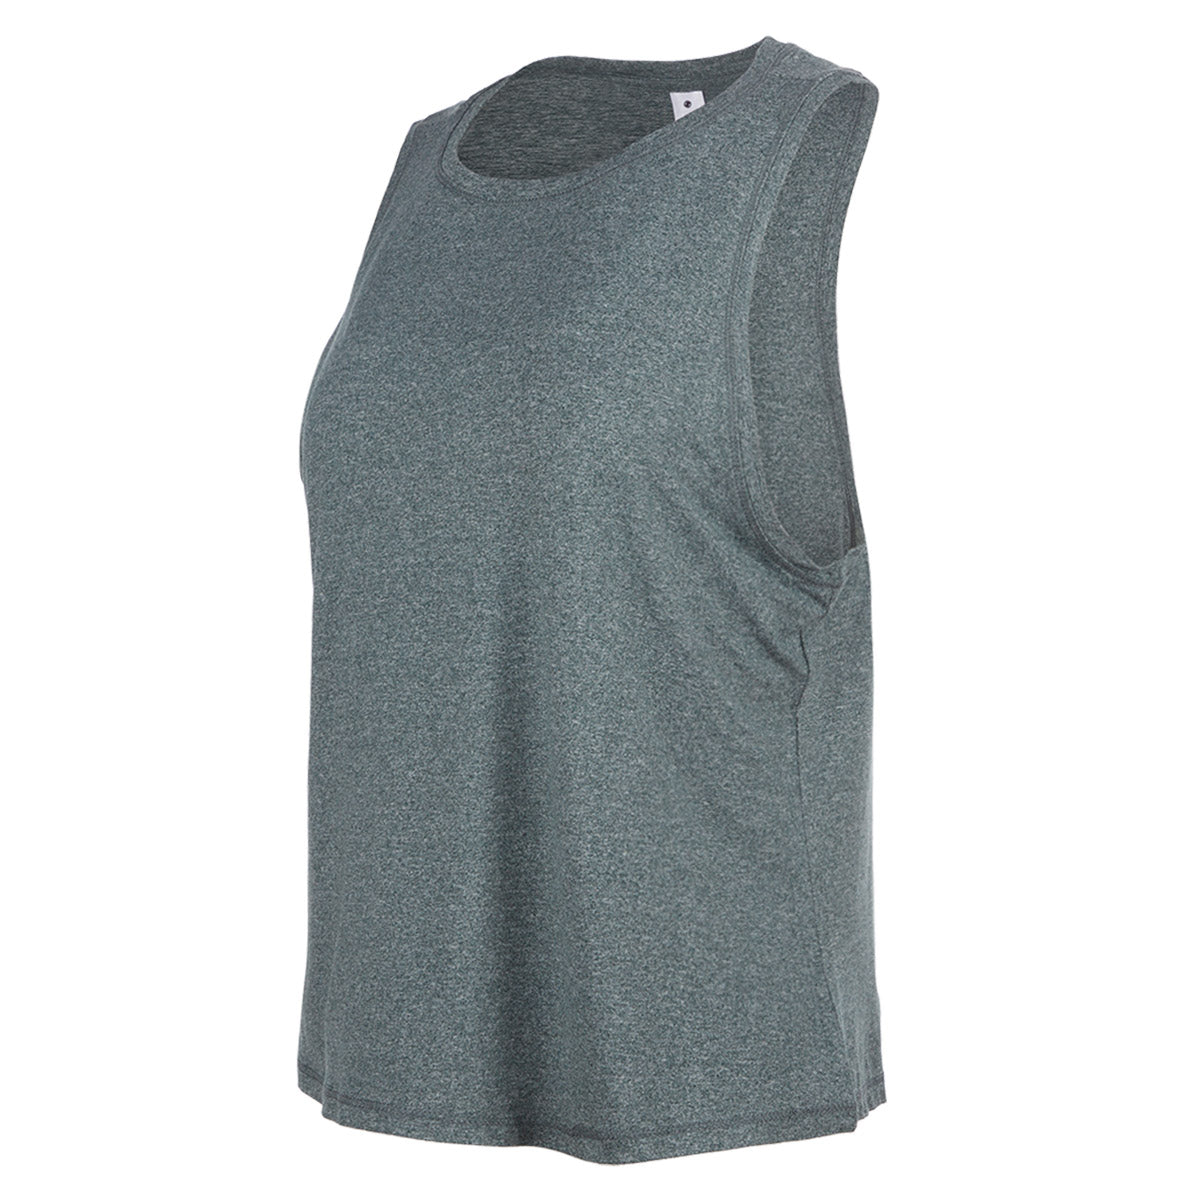 Yogalicious - Women's 2 Pack Everyday Tank Top - Heather Charcoal/Heather  Grey - Large - ShopStyle